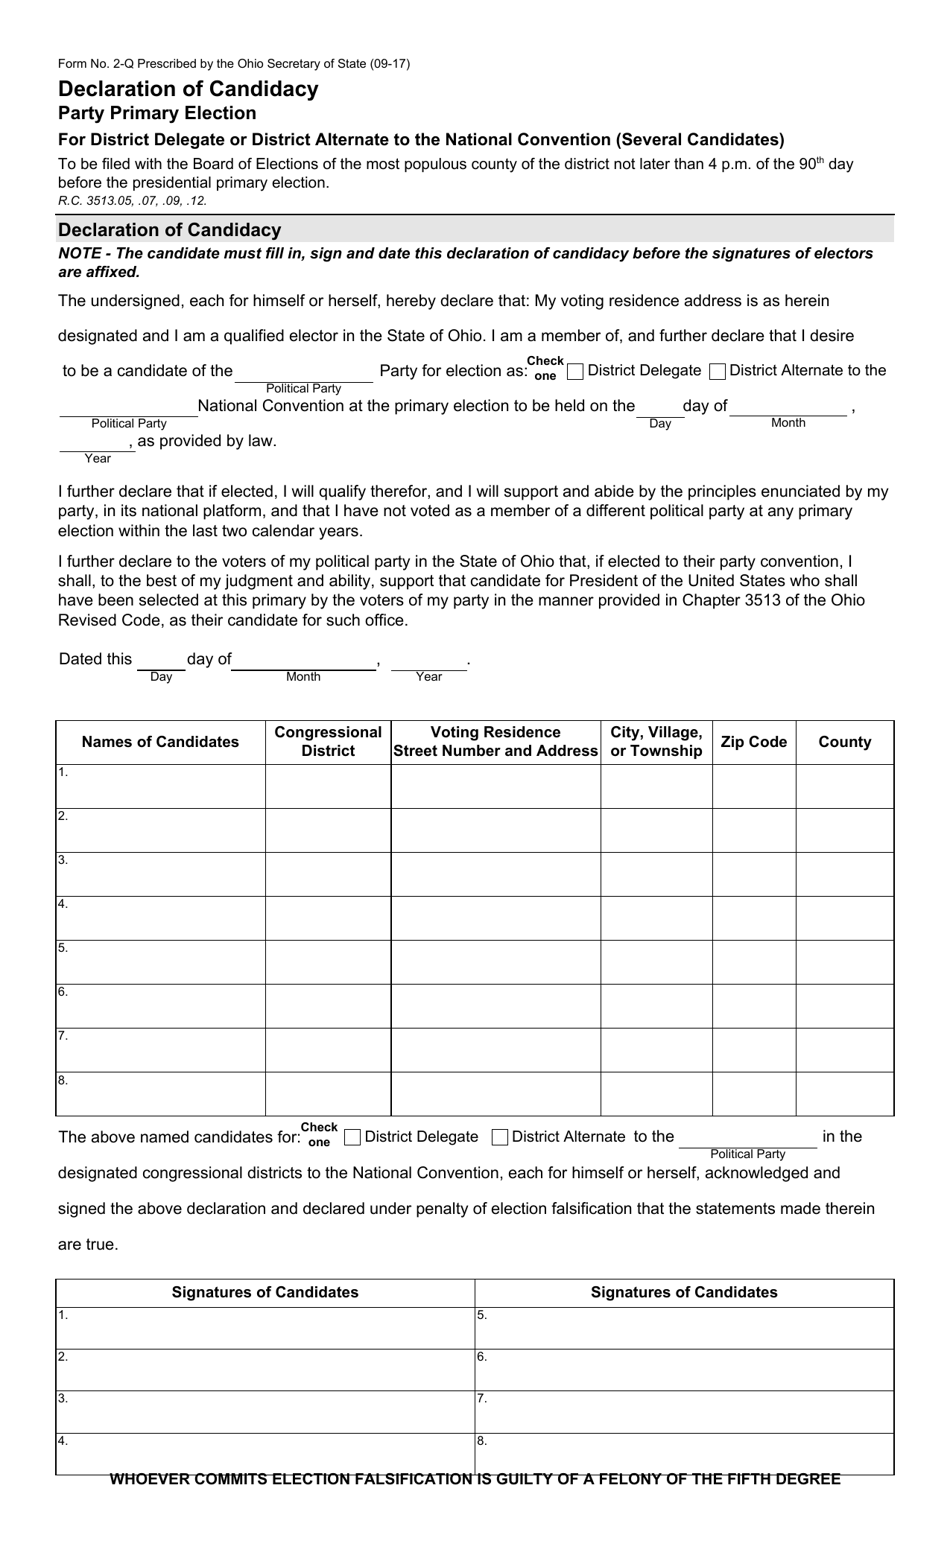 Form 2-Q Declaration of Candidacy for District Delegate or District Alternate to the National Convention (Several Candidates) - Party Primary Election - Ohio, Page 1